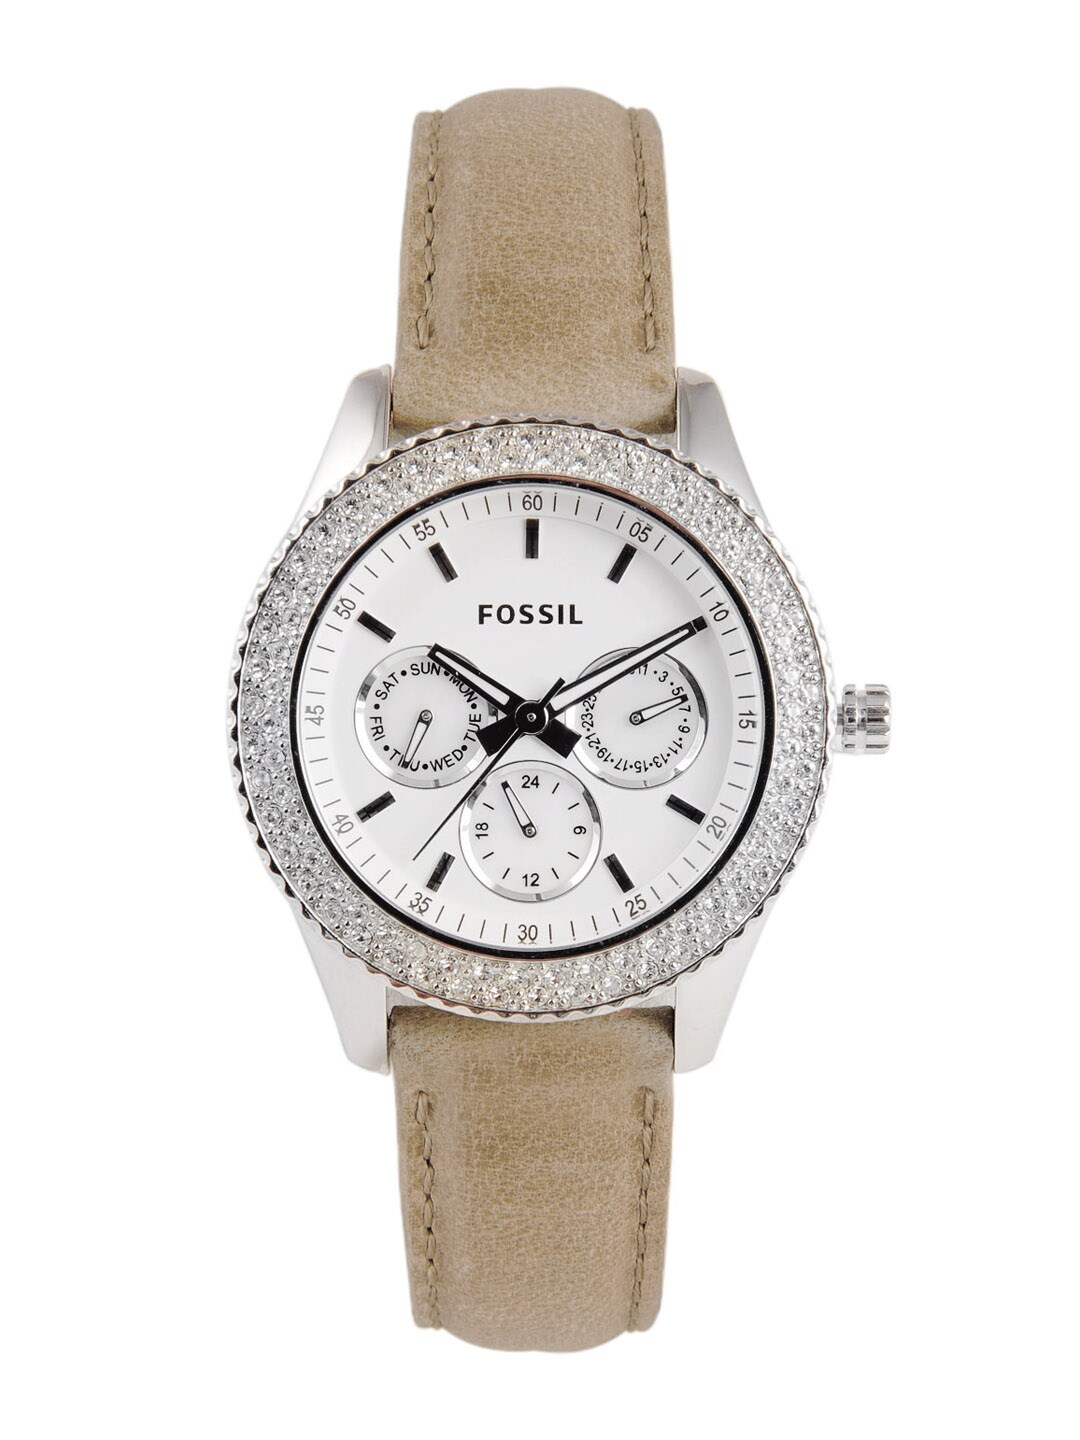 Fossil Women White Dial Chronograph Watch ES2997